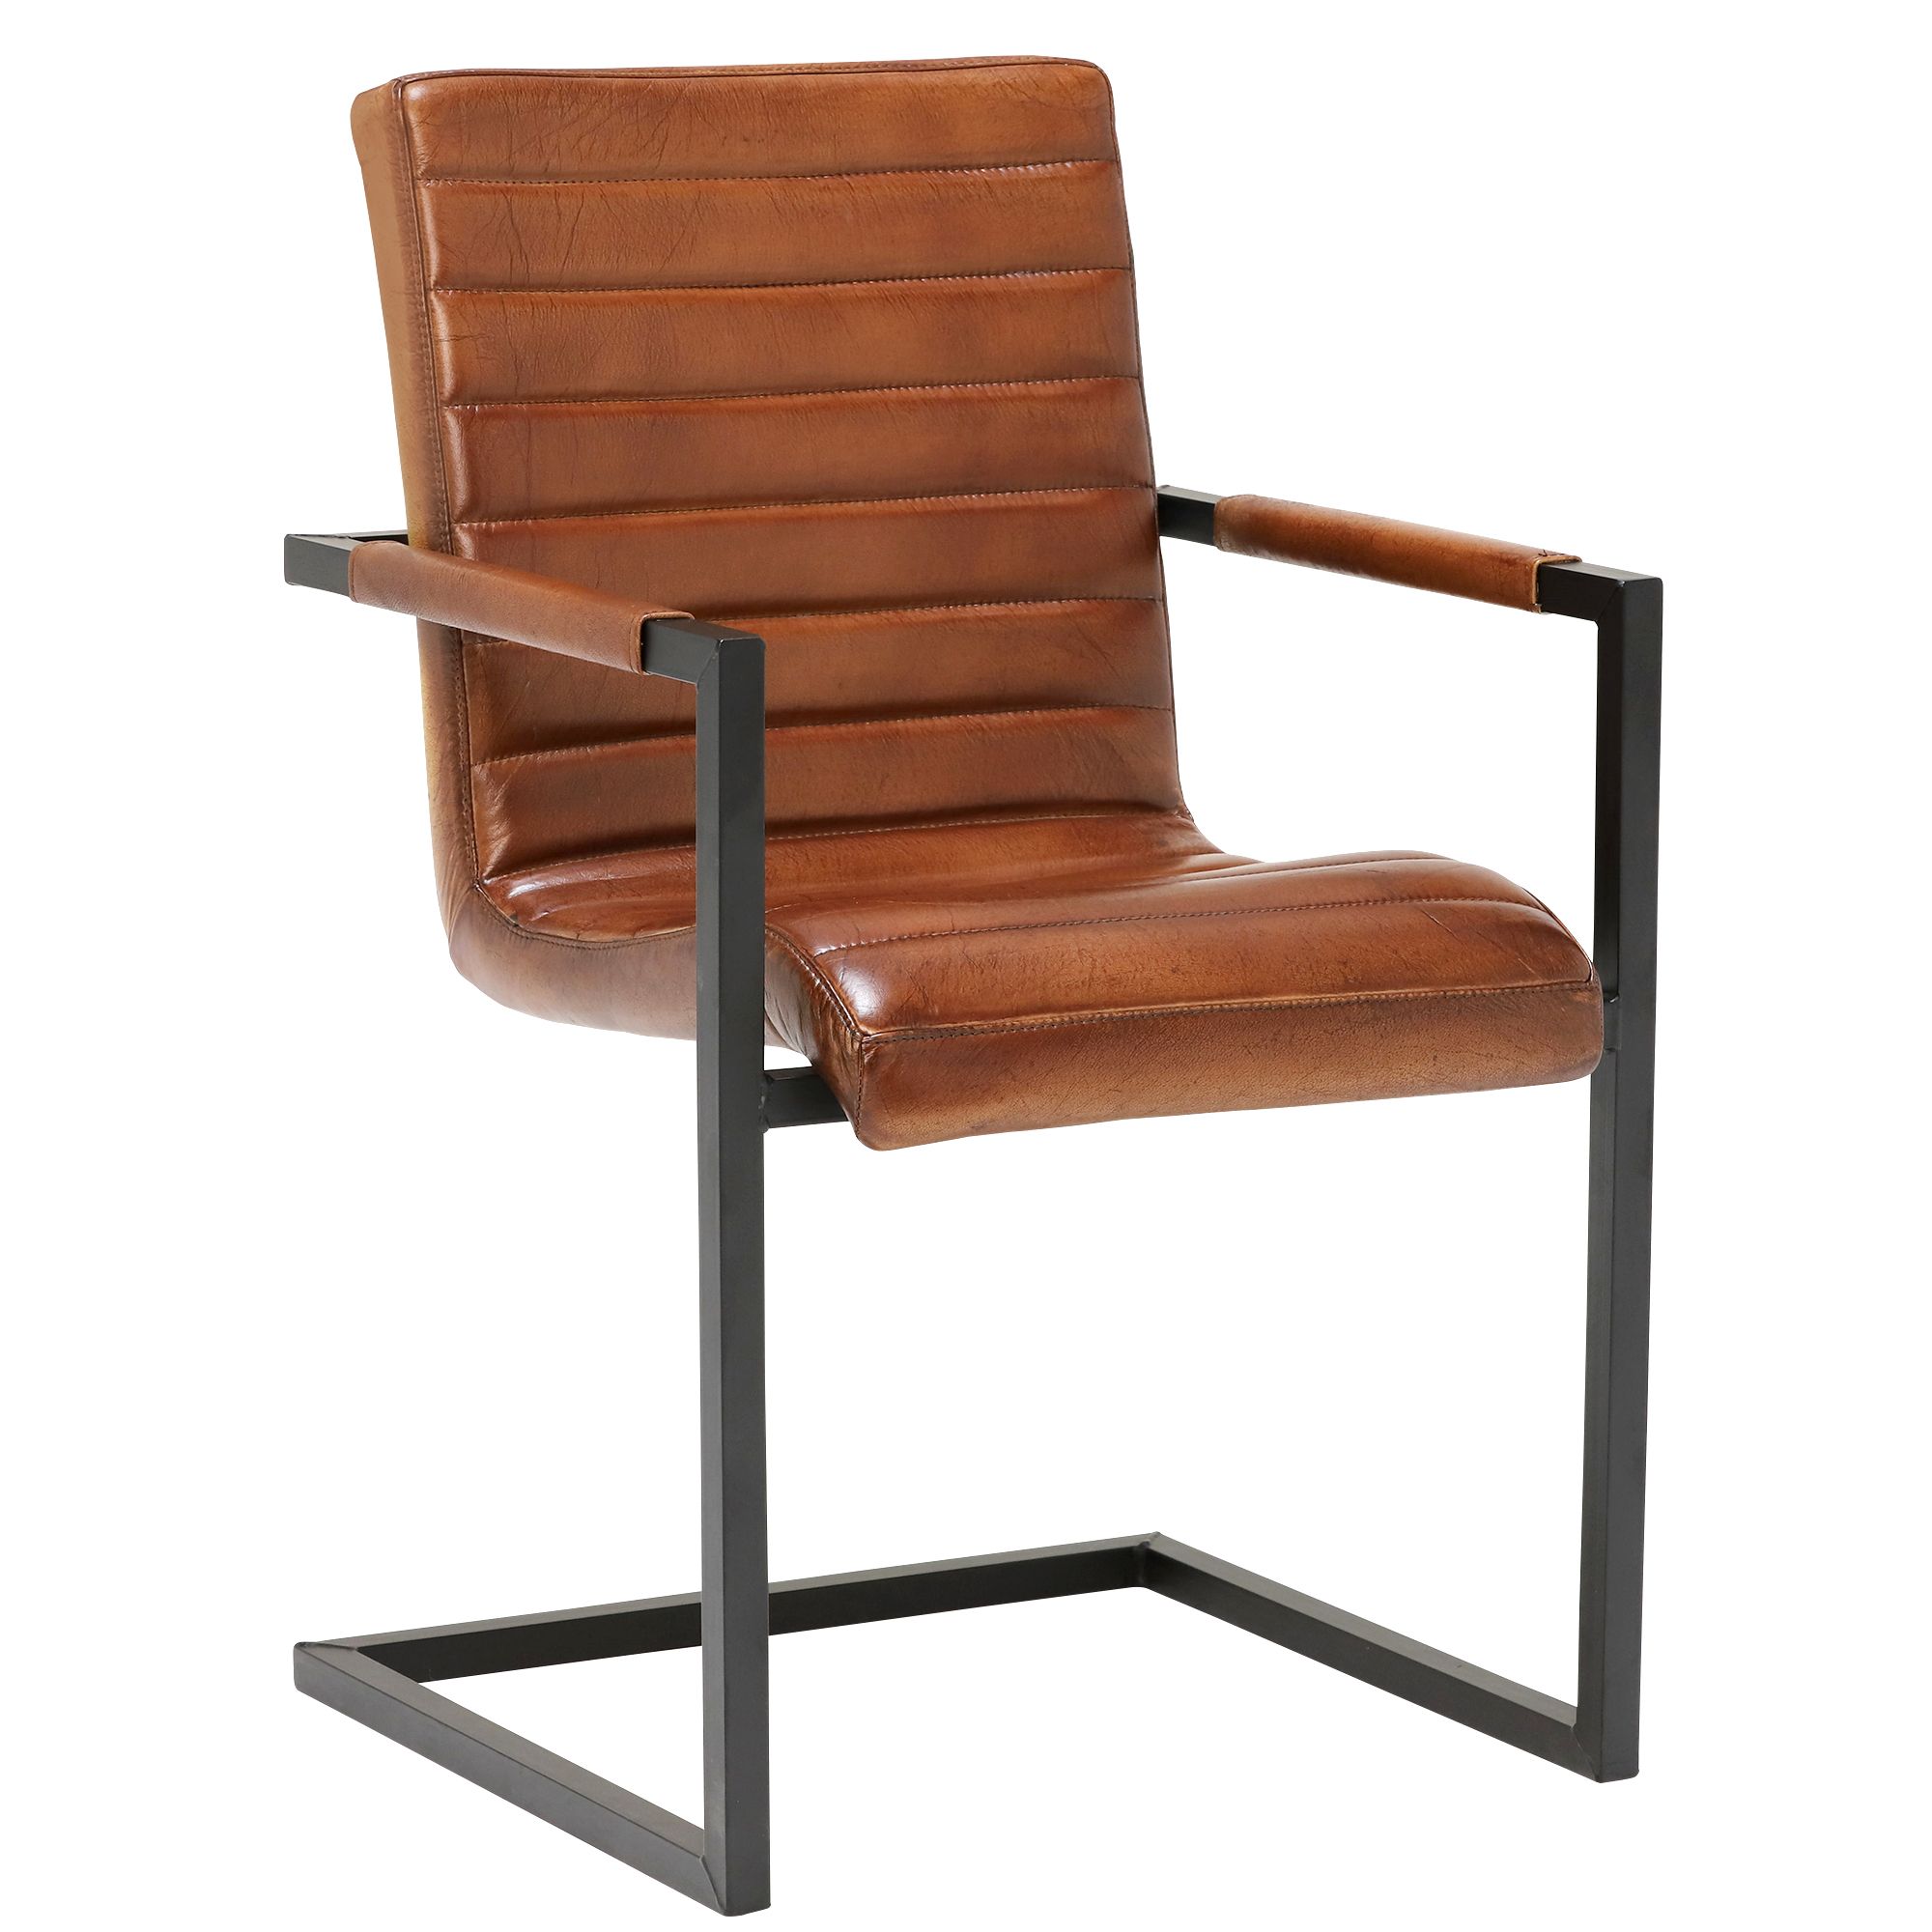 Brutus Buffalo Leather Dining Chair, Brown – Barker & Stonehouse